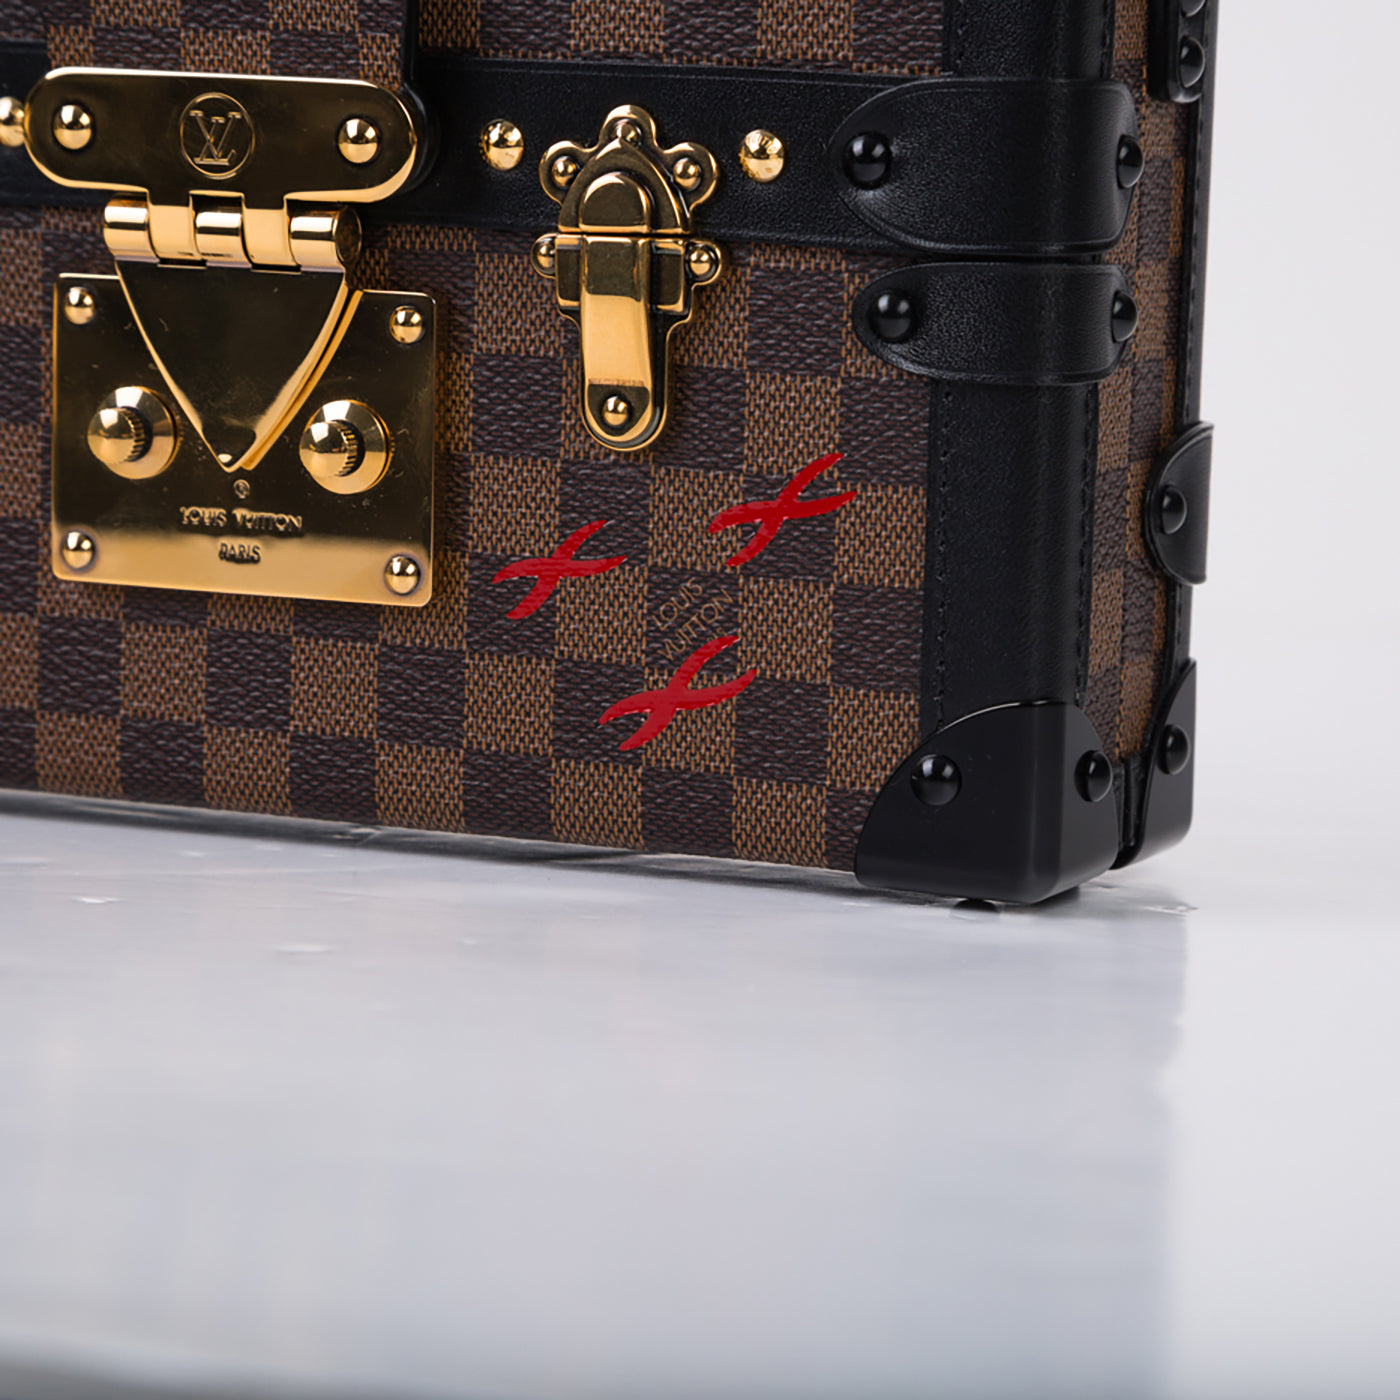 Treasure Chest: Shop the Petite Malle now at www.Bagista.co.uk